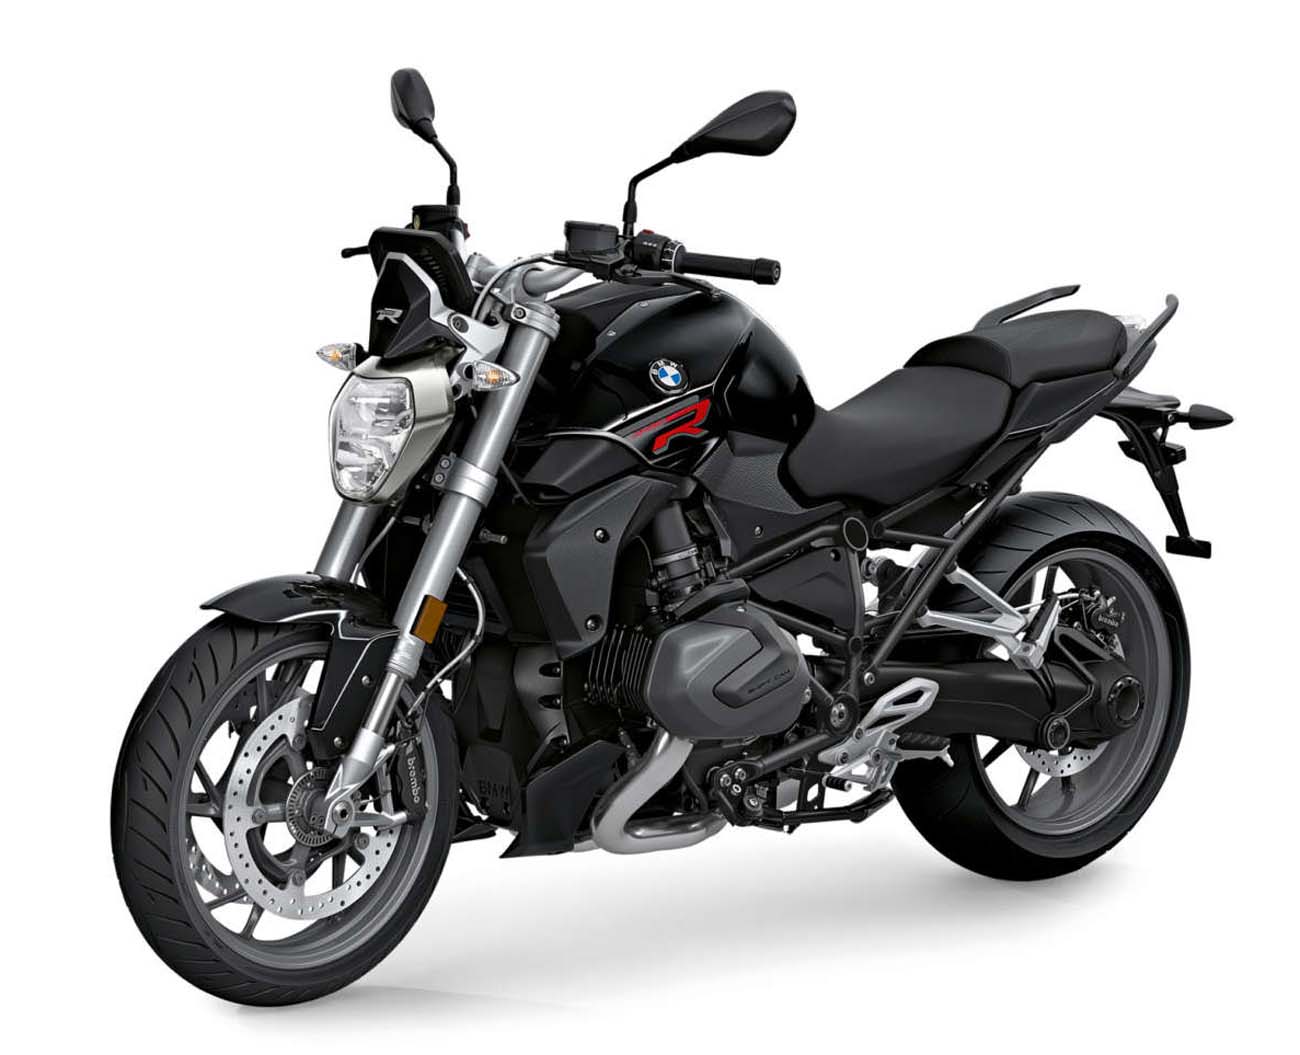 BMW R 1250R technical specifications